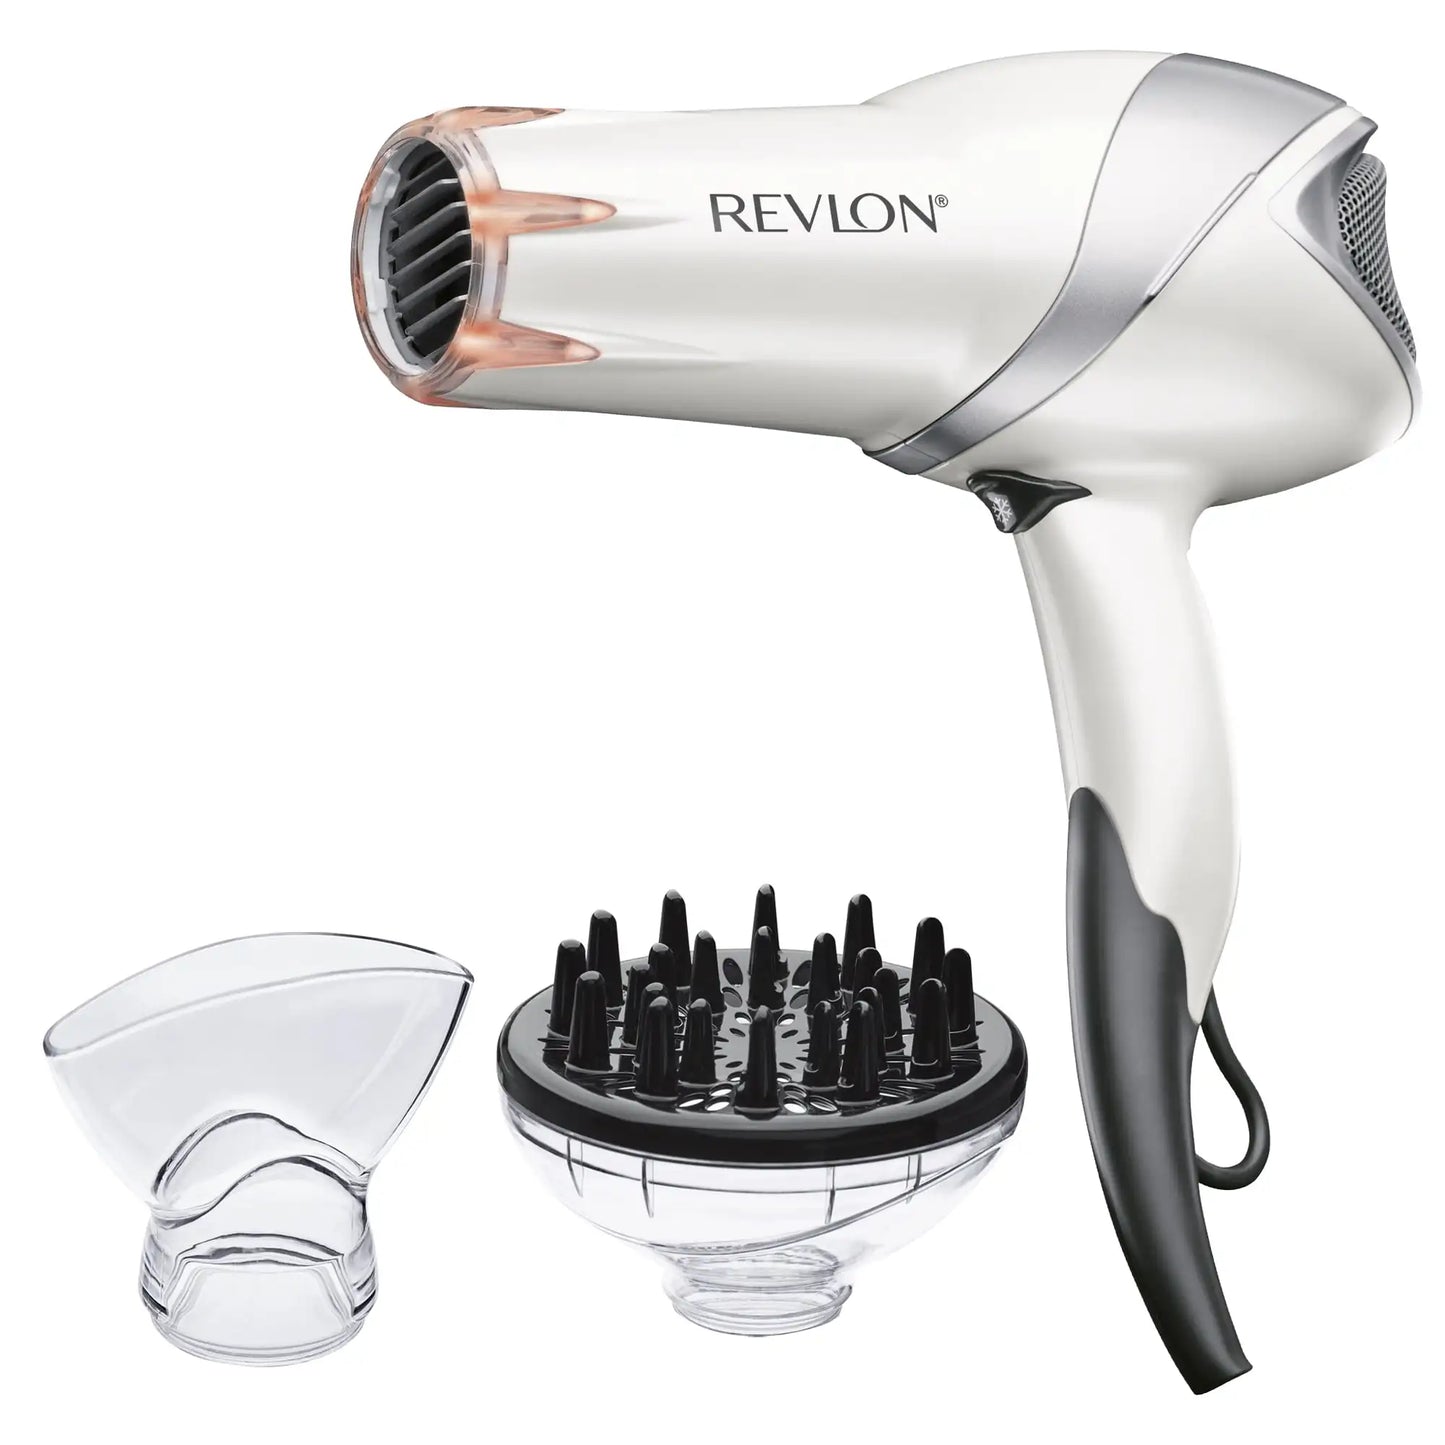 Revlon Pro Collection Infrared Hair Dryer
Pearl Blow Dryer with Concentrator and Diffuser